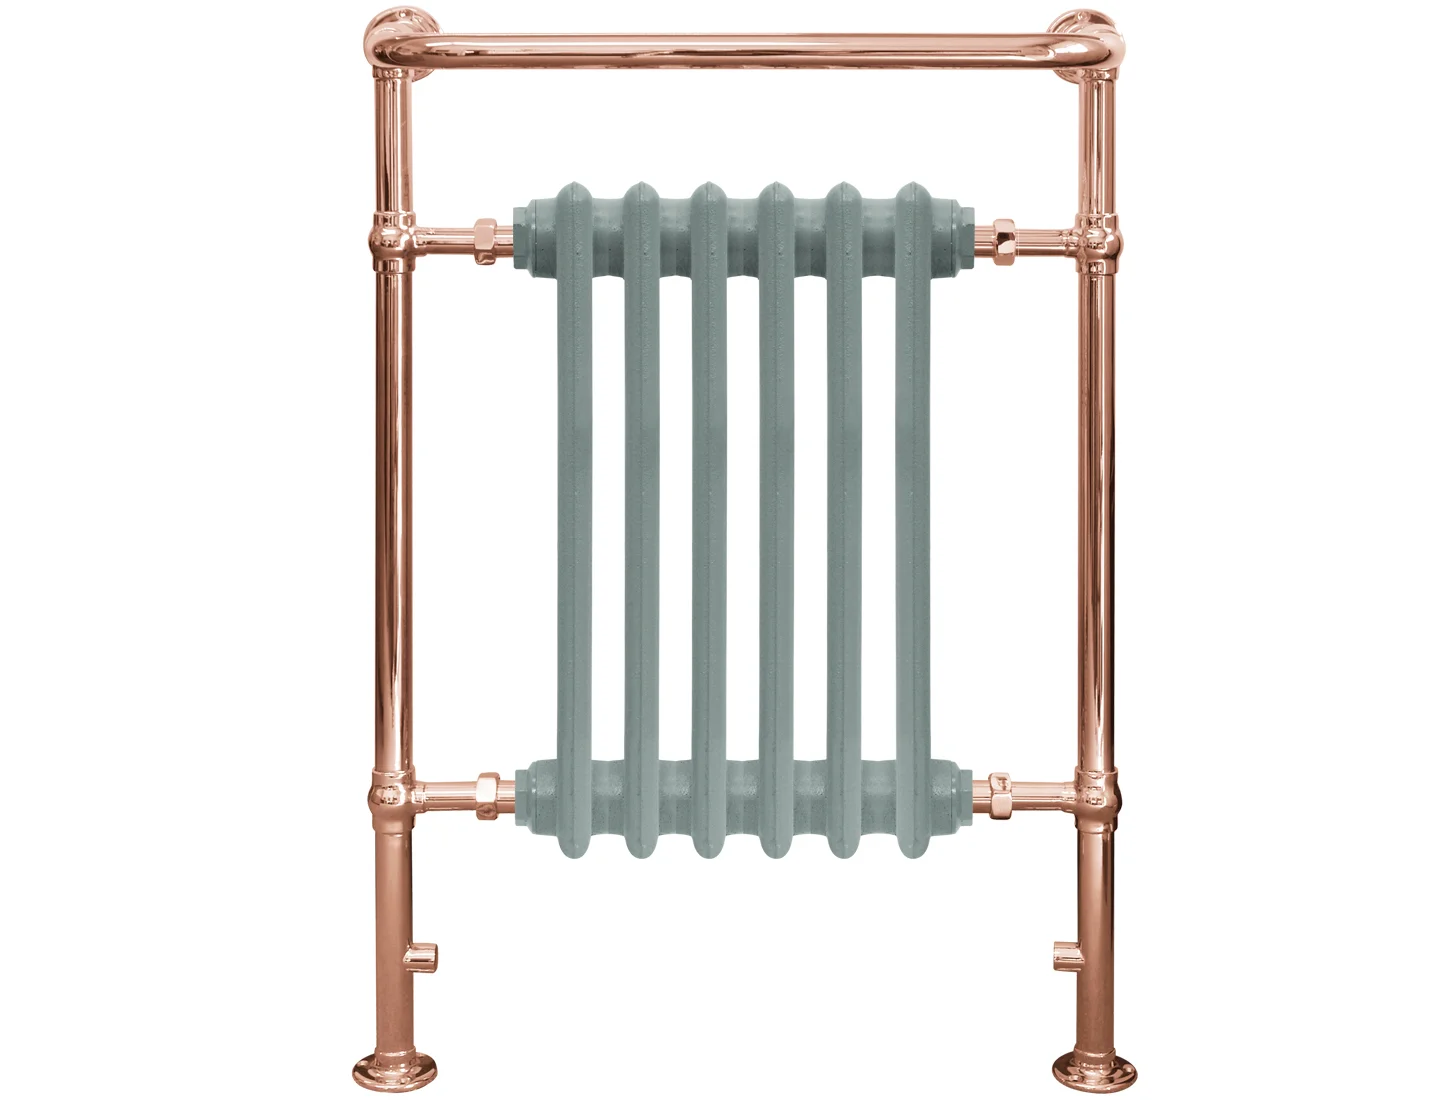 Oval Room Blue Finish Broughton Towel Rail Copper - 960mm x 675mm Carron_Home Refresh